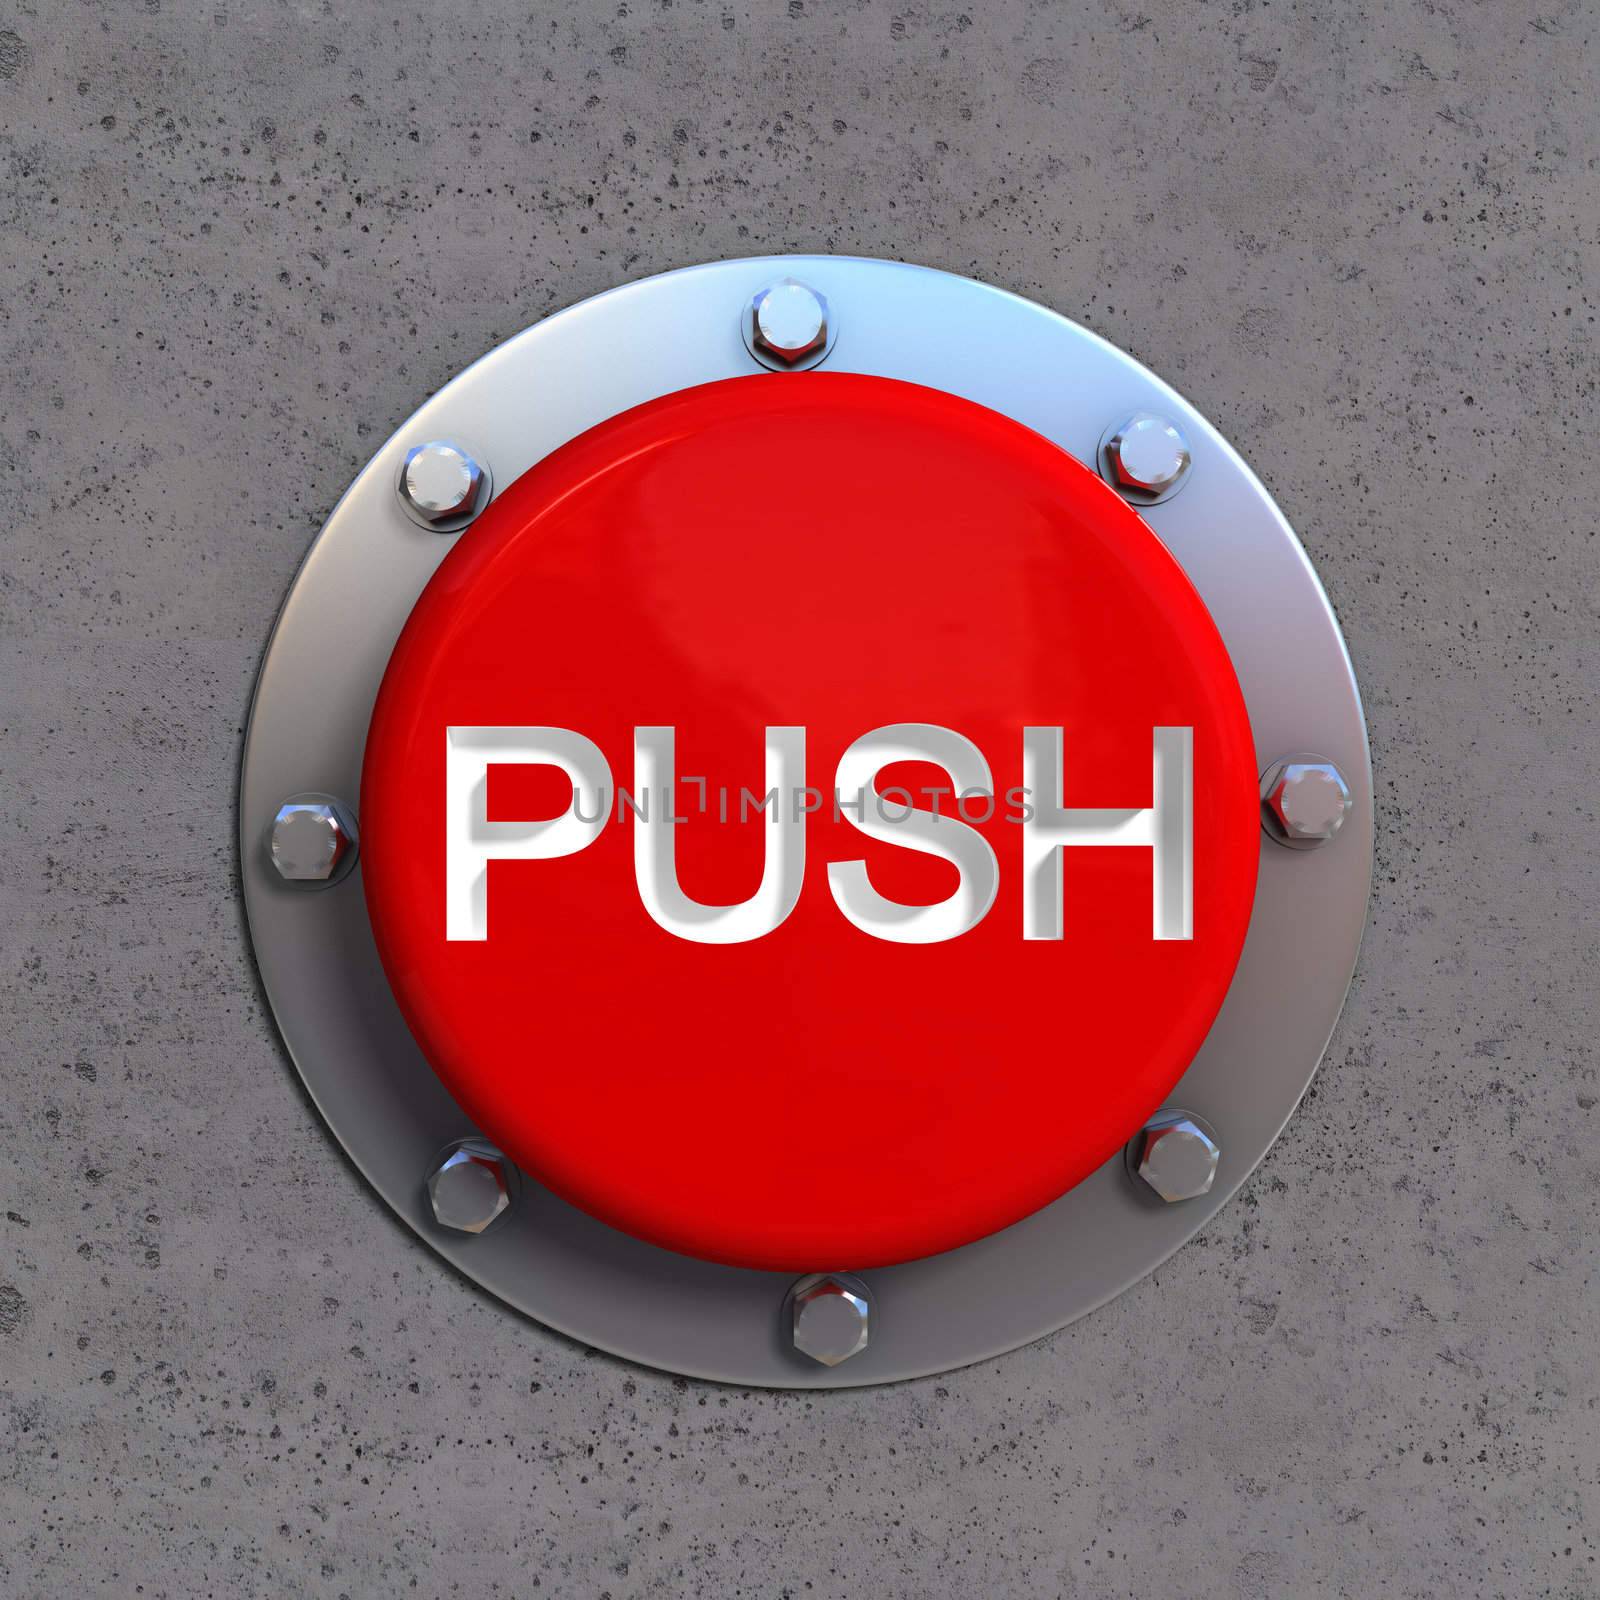 Closeup of red pushbutton